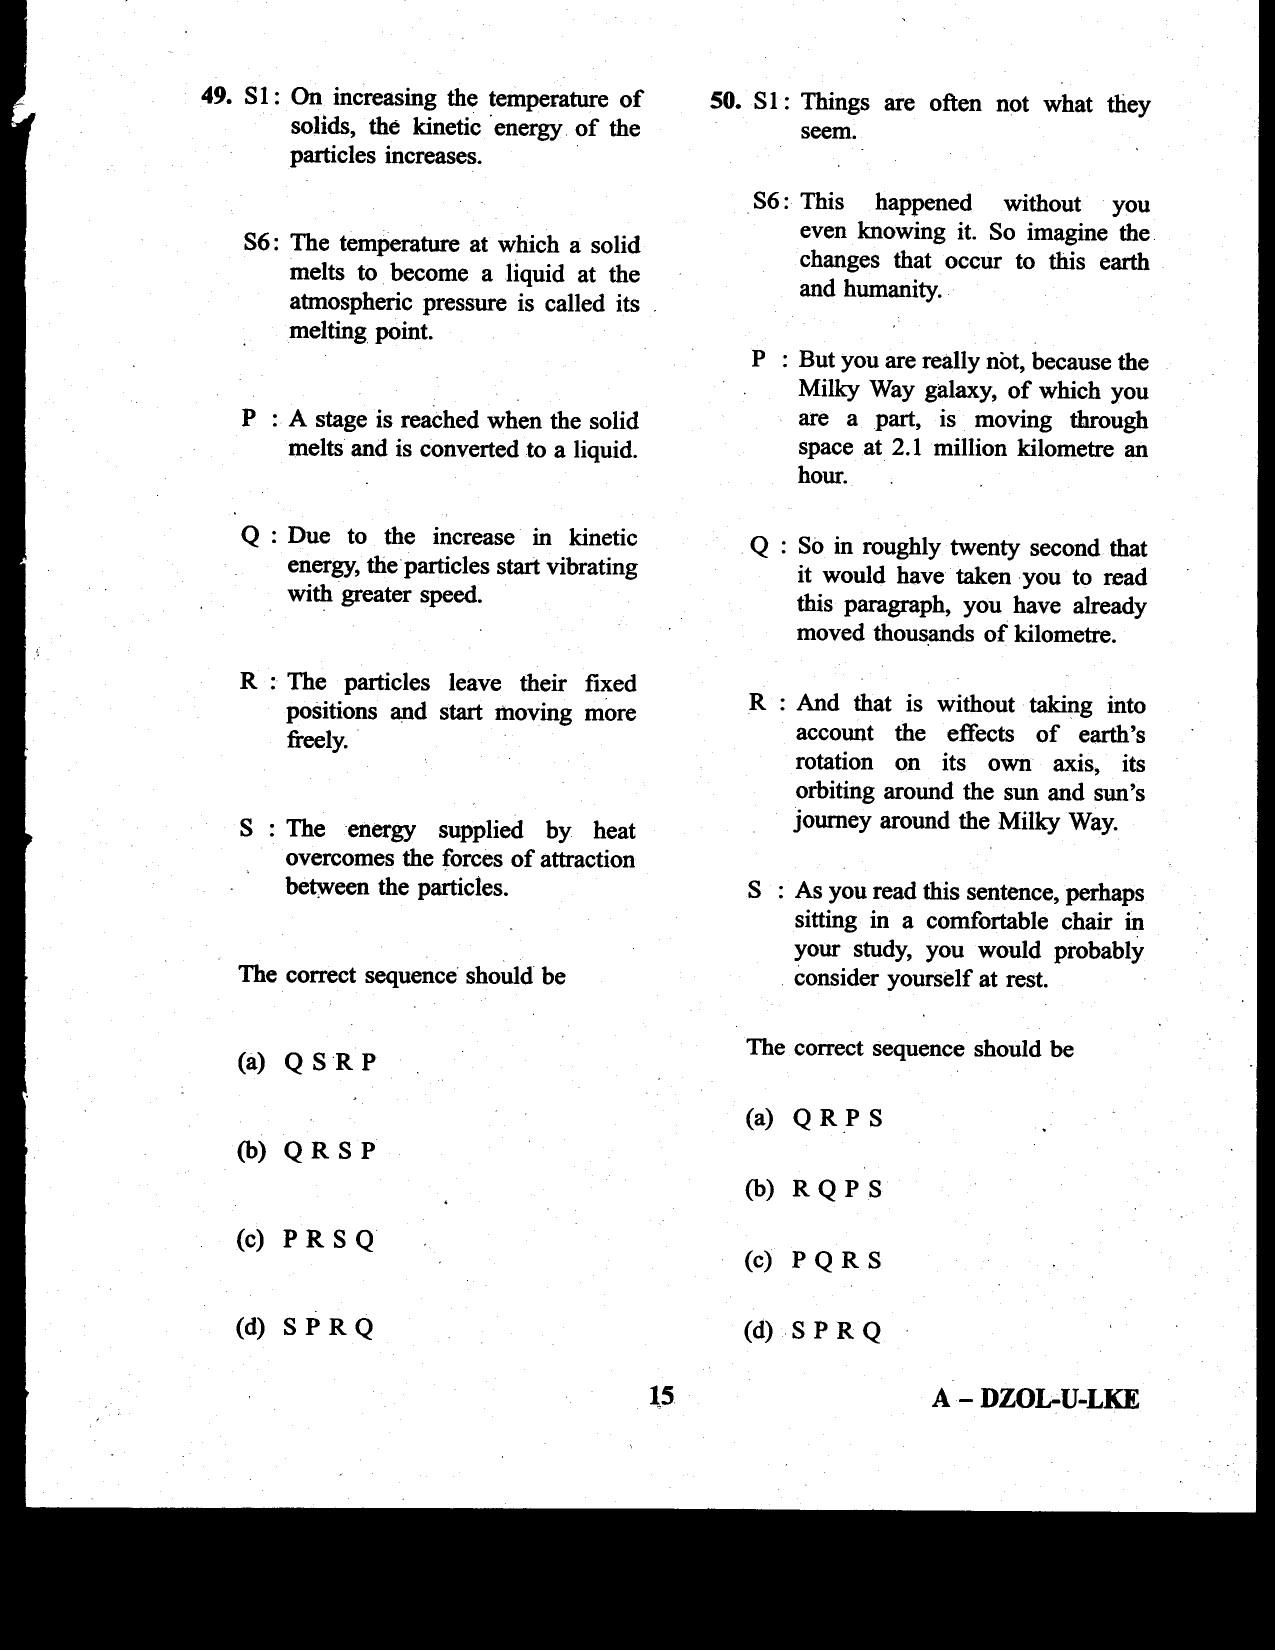 CDS II Examination 2020 English Question Paper - Image 15